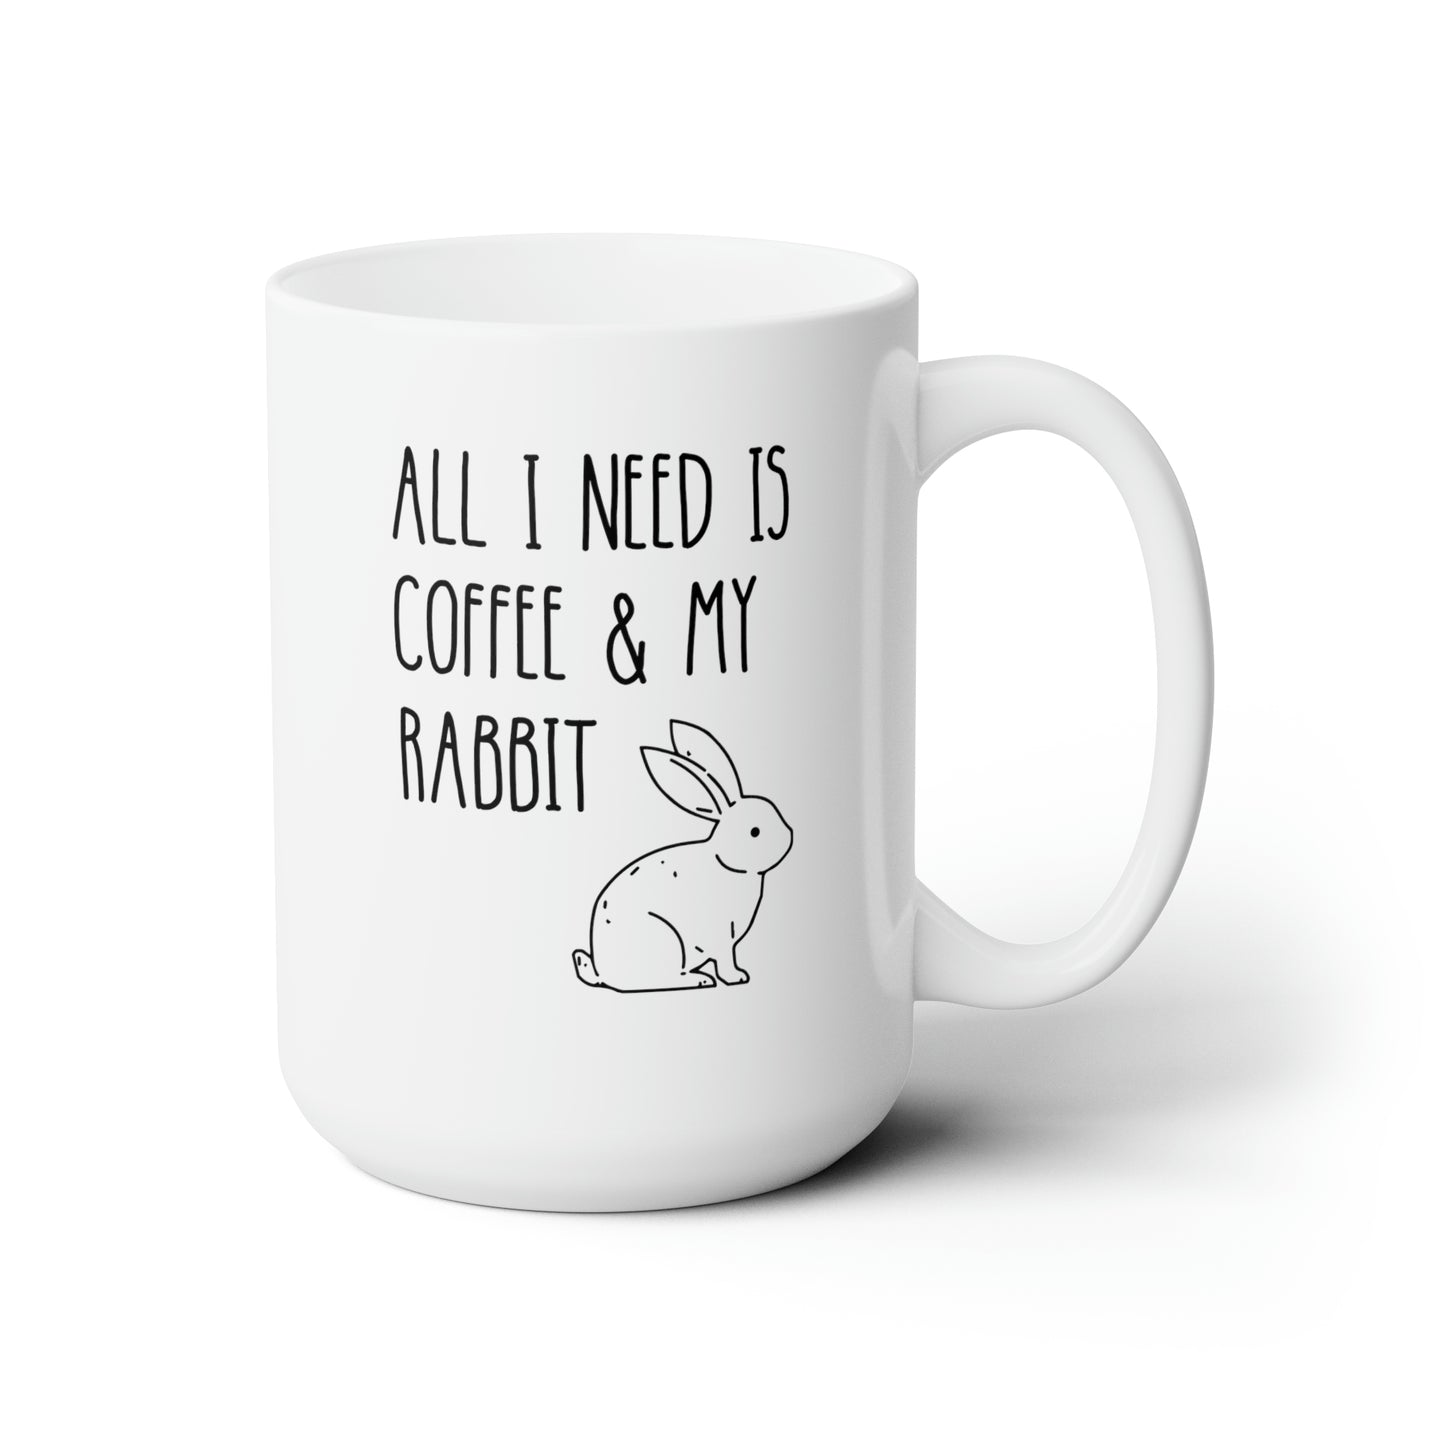 All I Need Is Coffee And My Rabbit 15oz white funny large coffee mug gift for her mom dad birthday bunny lover pet owner furparent waveywares wavey wares wavywares wavy wares